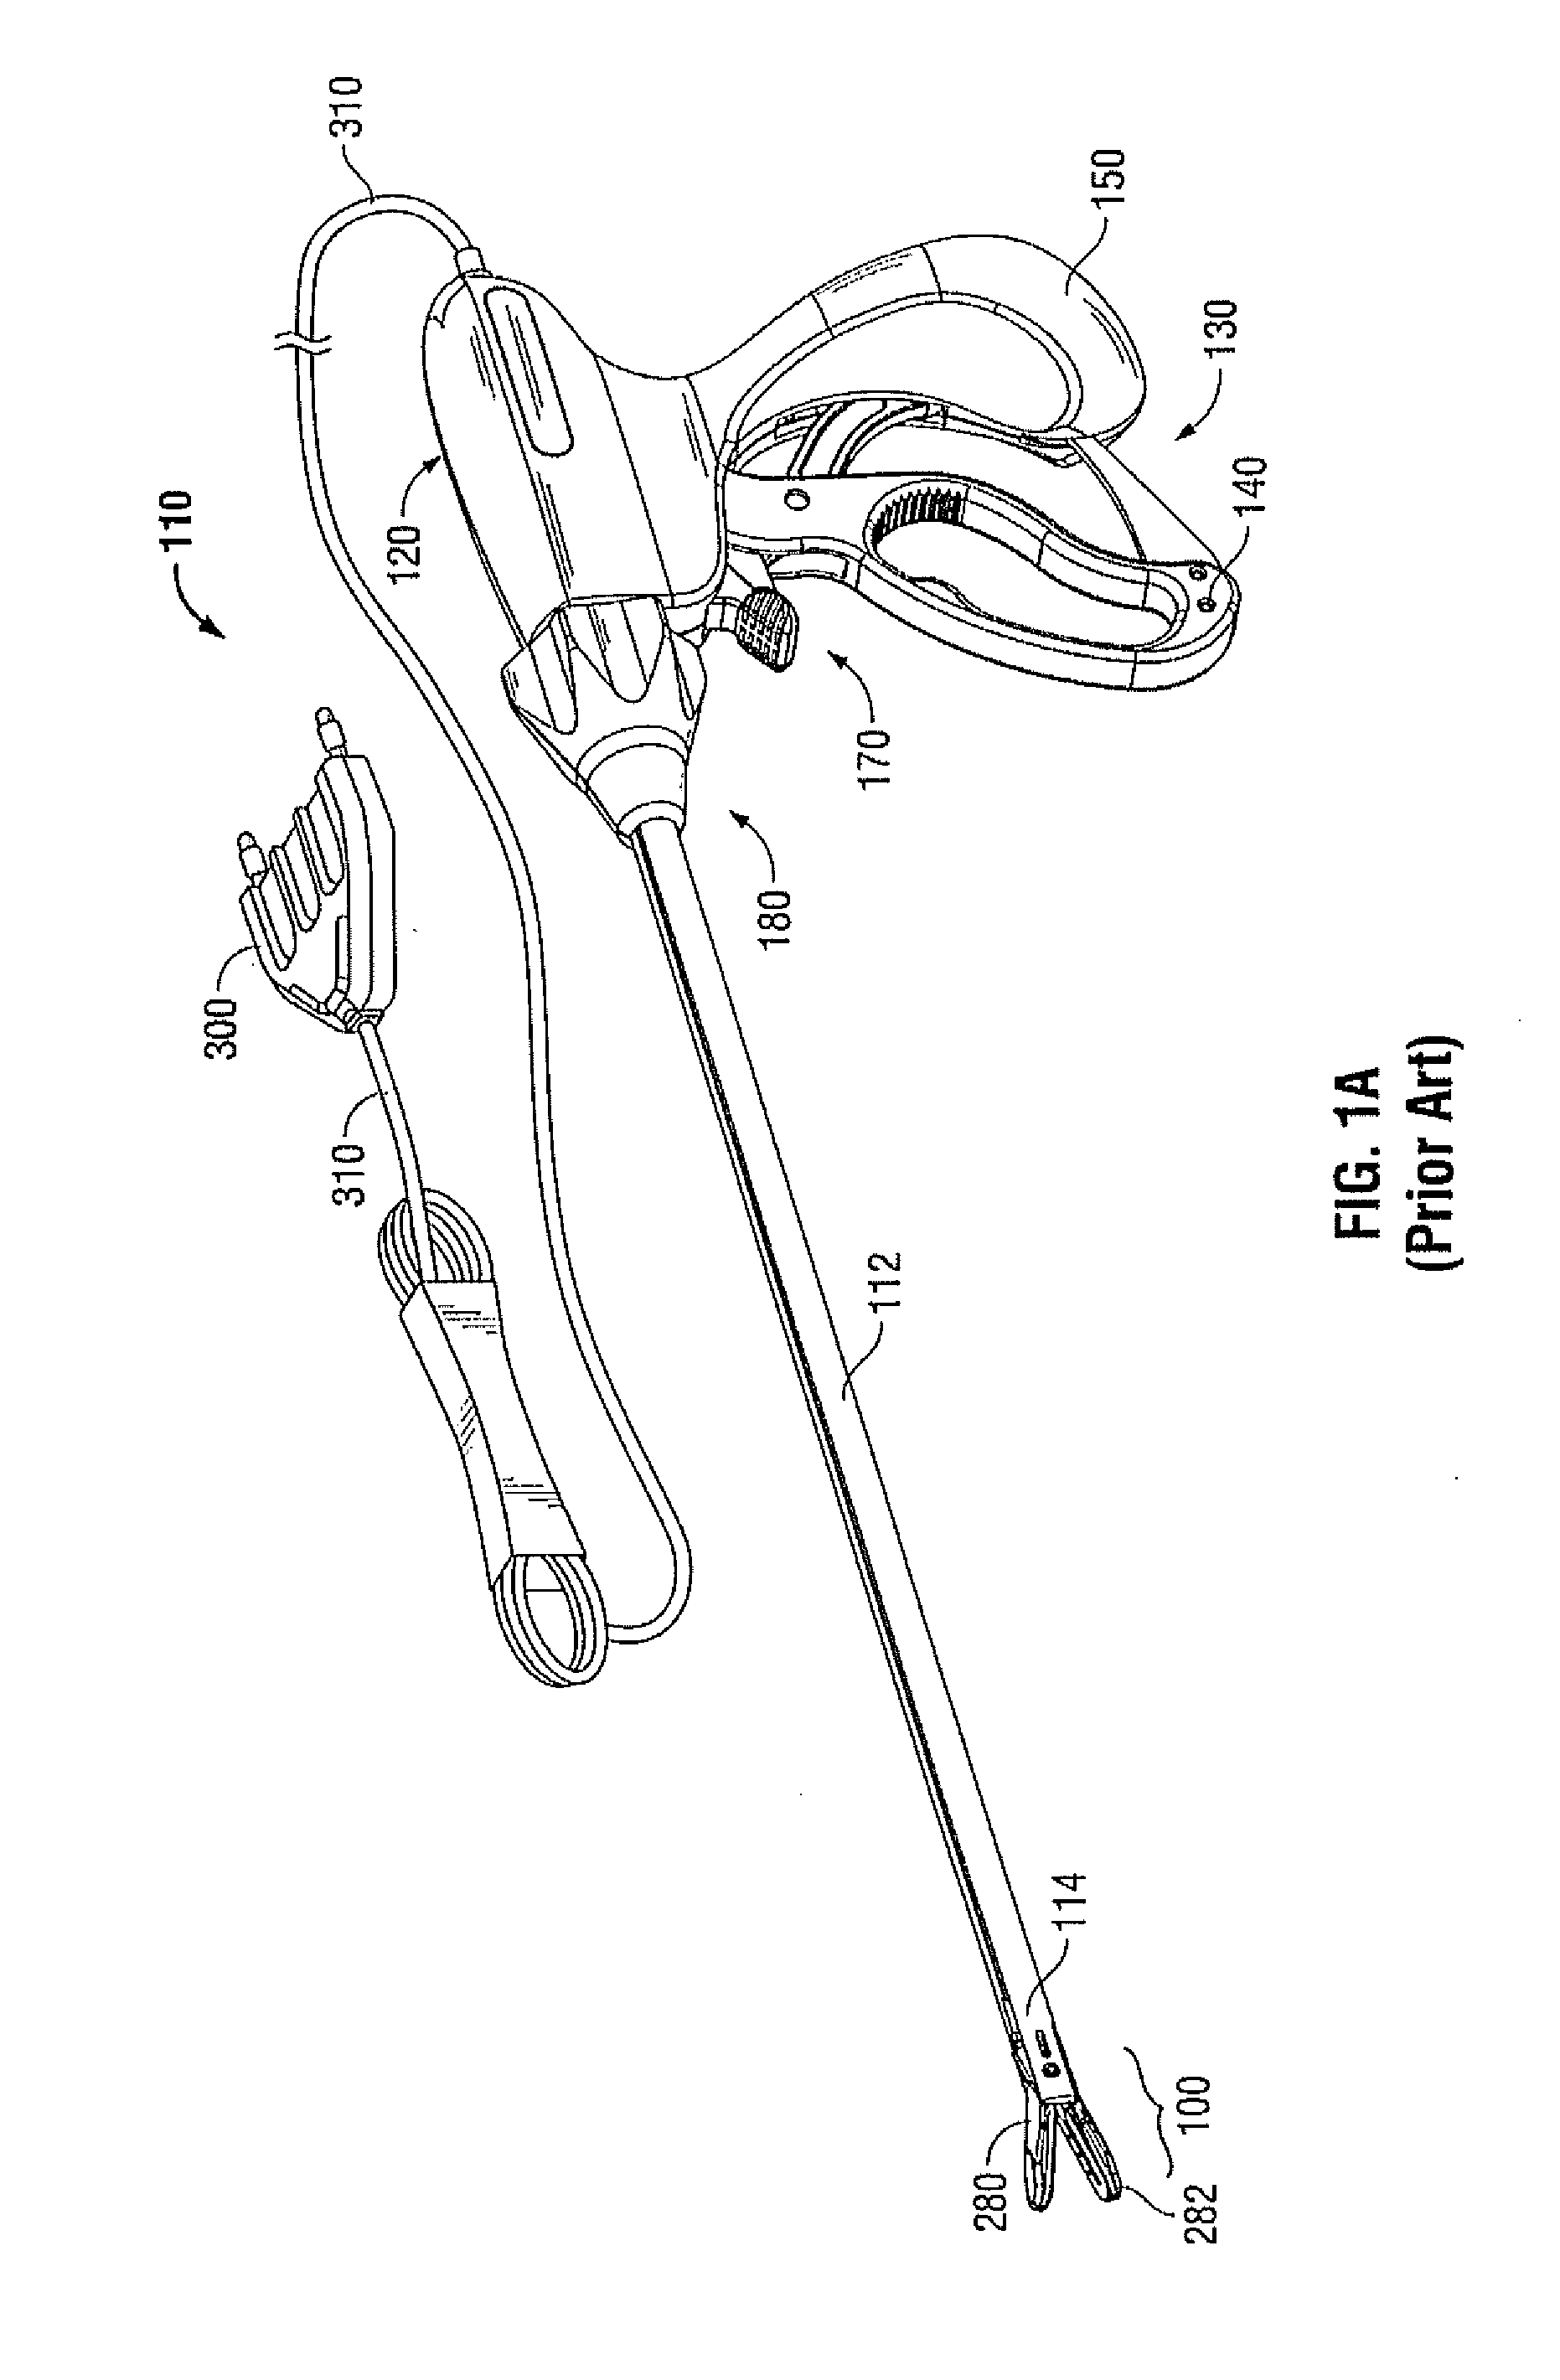 Electrically Conductive/Insulative Over Shoe for Tissue Fusion